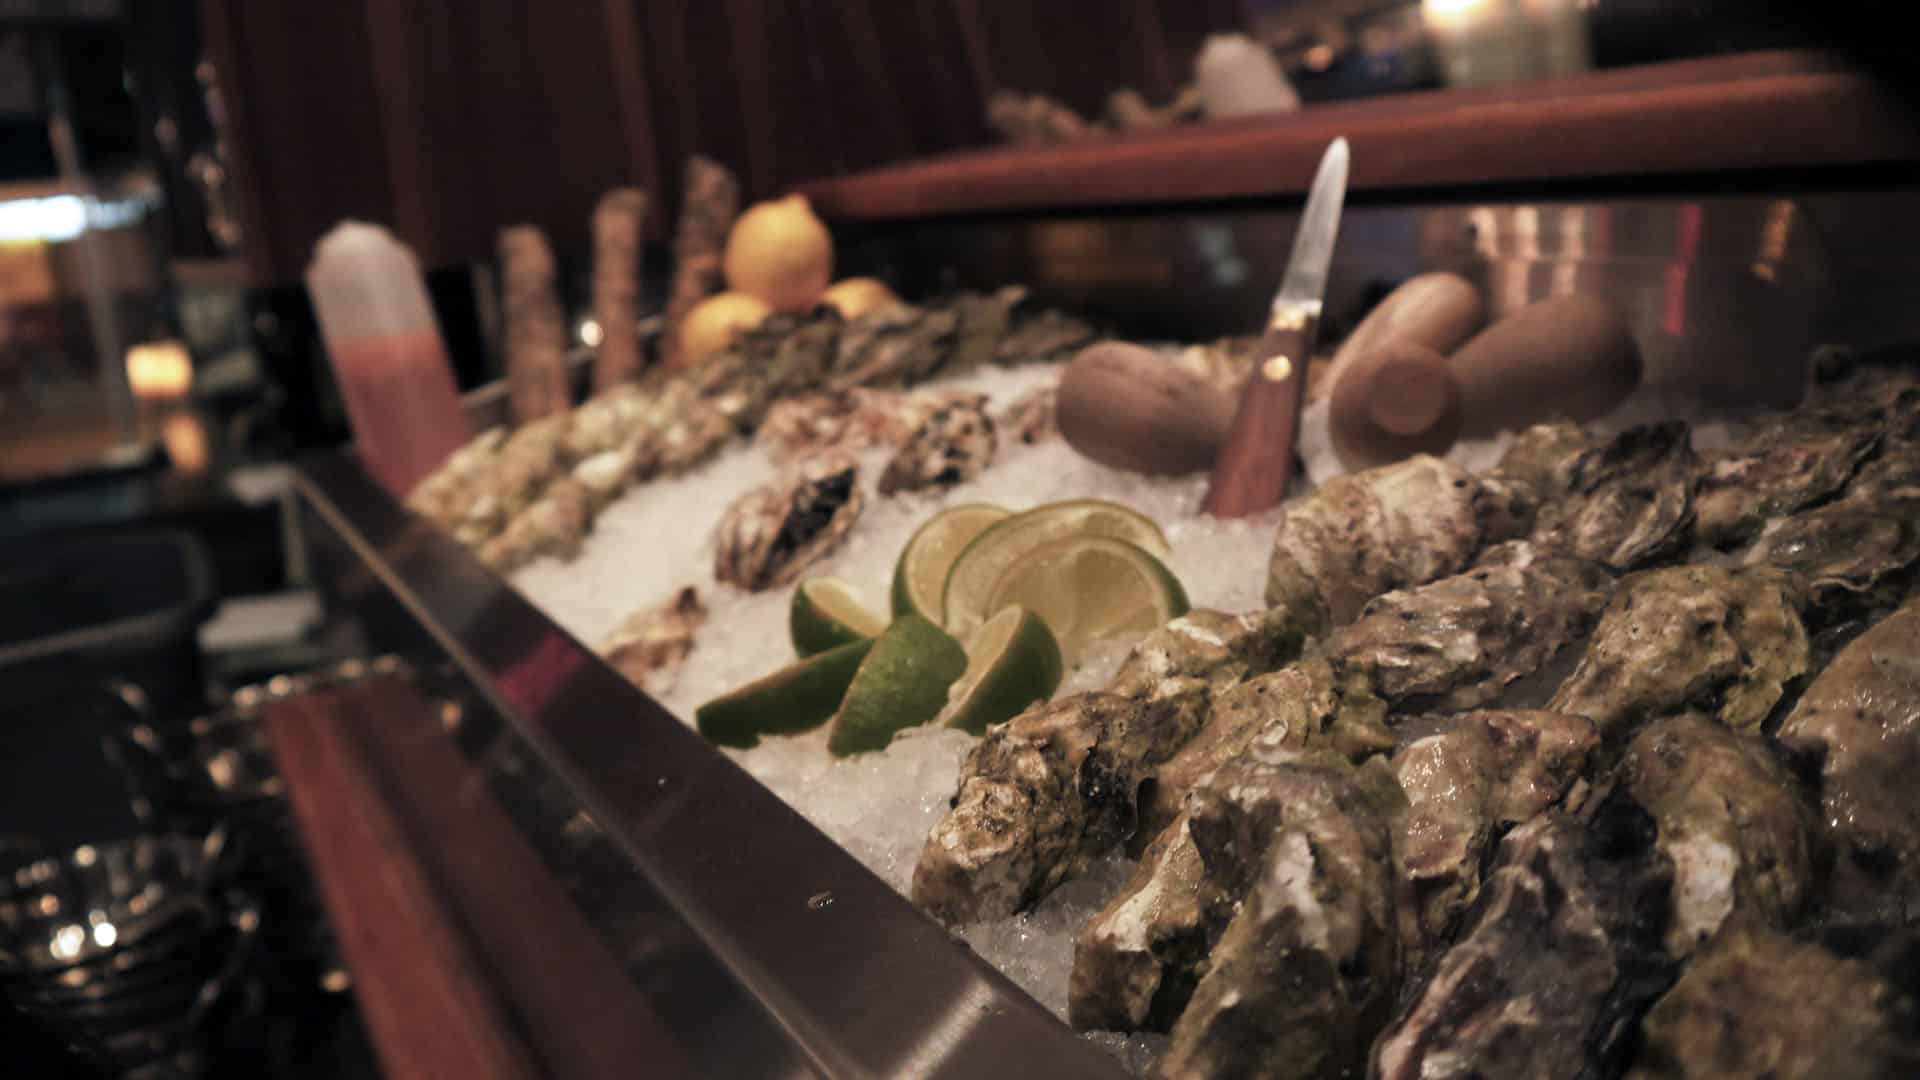 Shuckers Oyster Bar & Grill